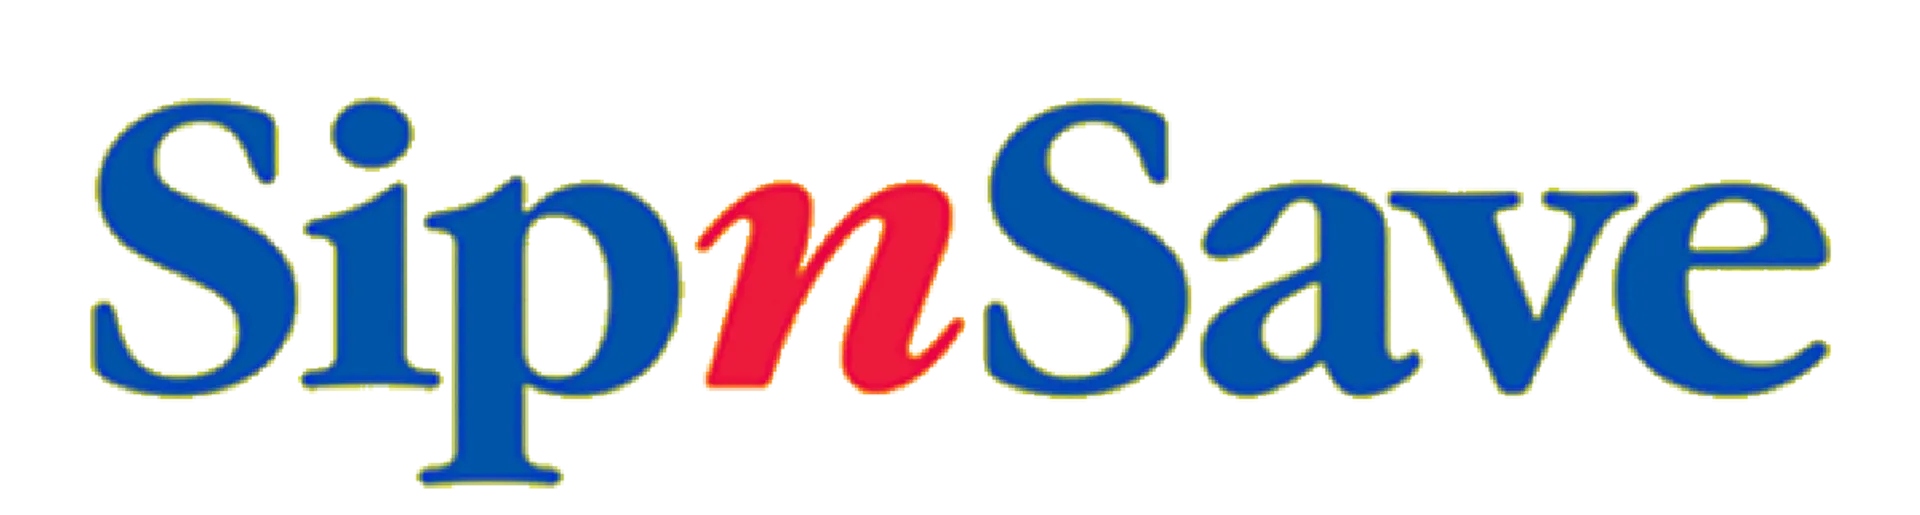 SIPNSAVE logo of current catalogue